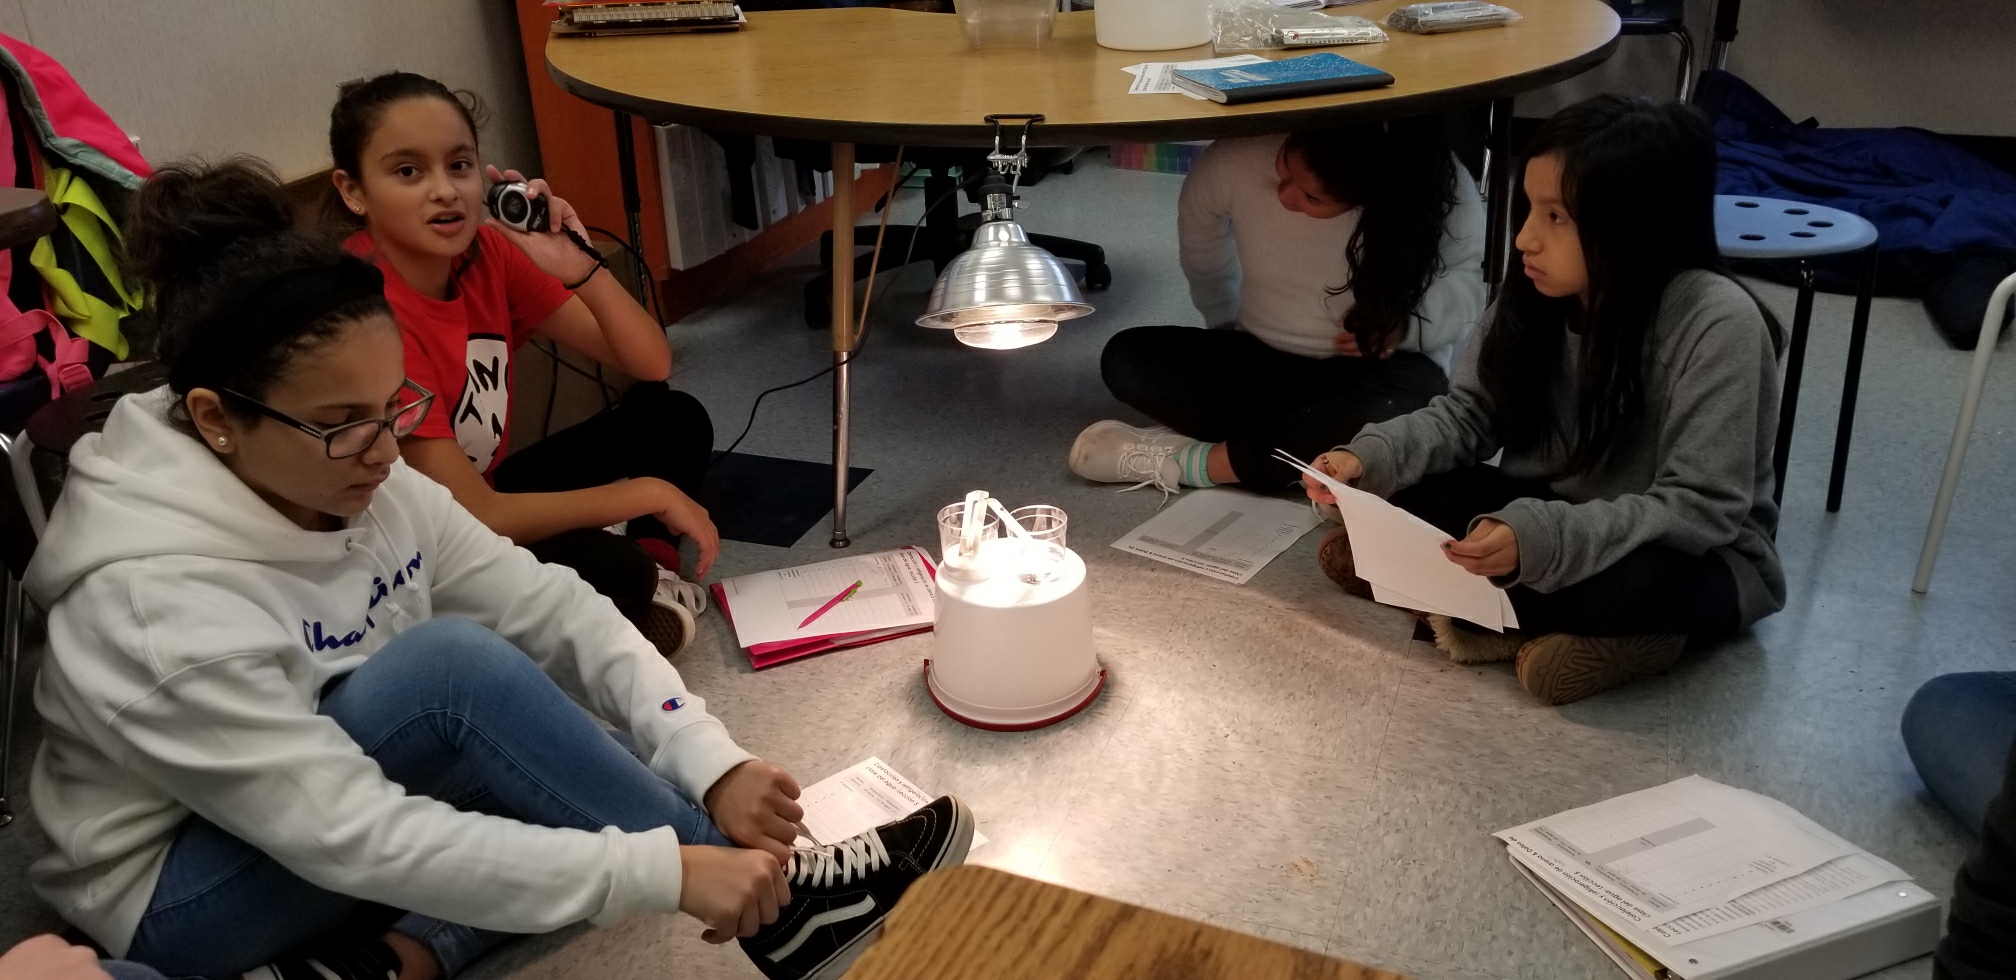 students conducting a science experiment